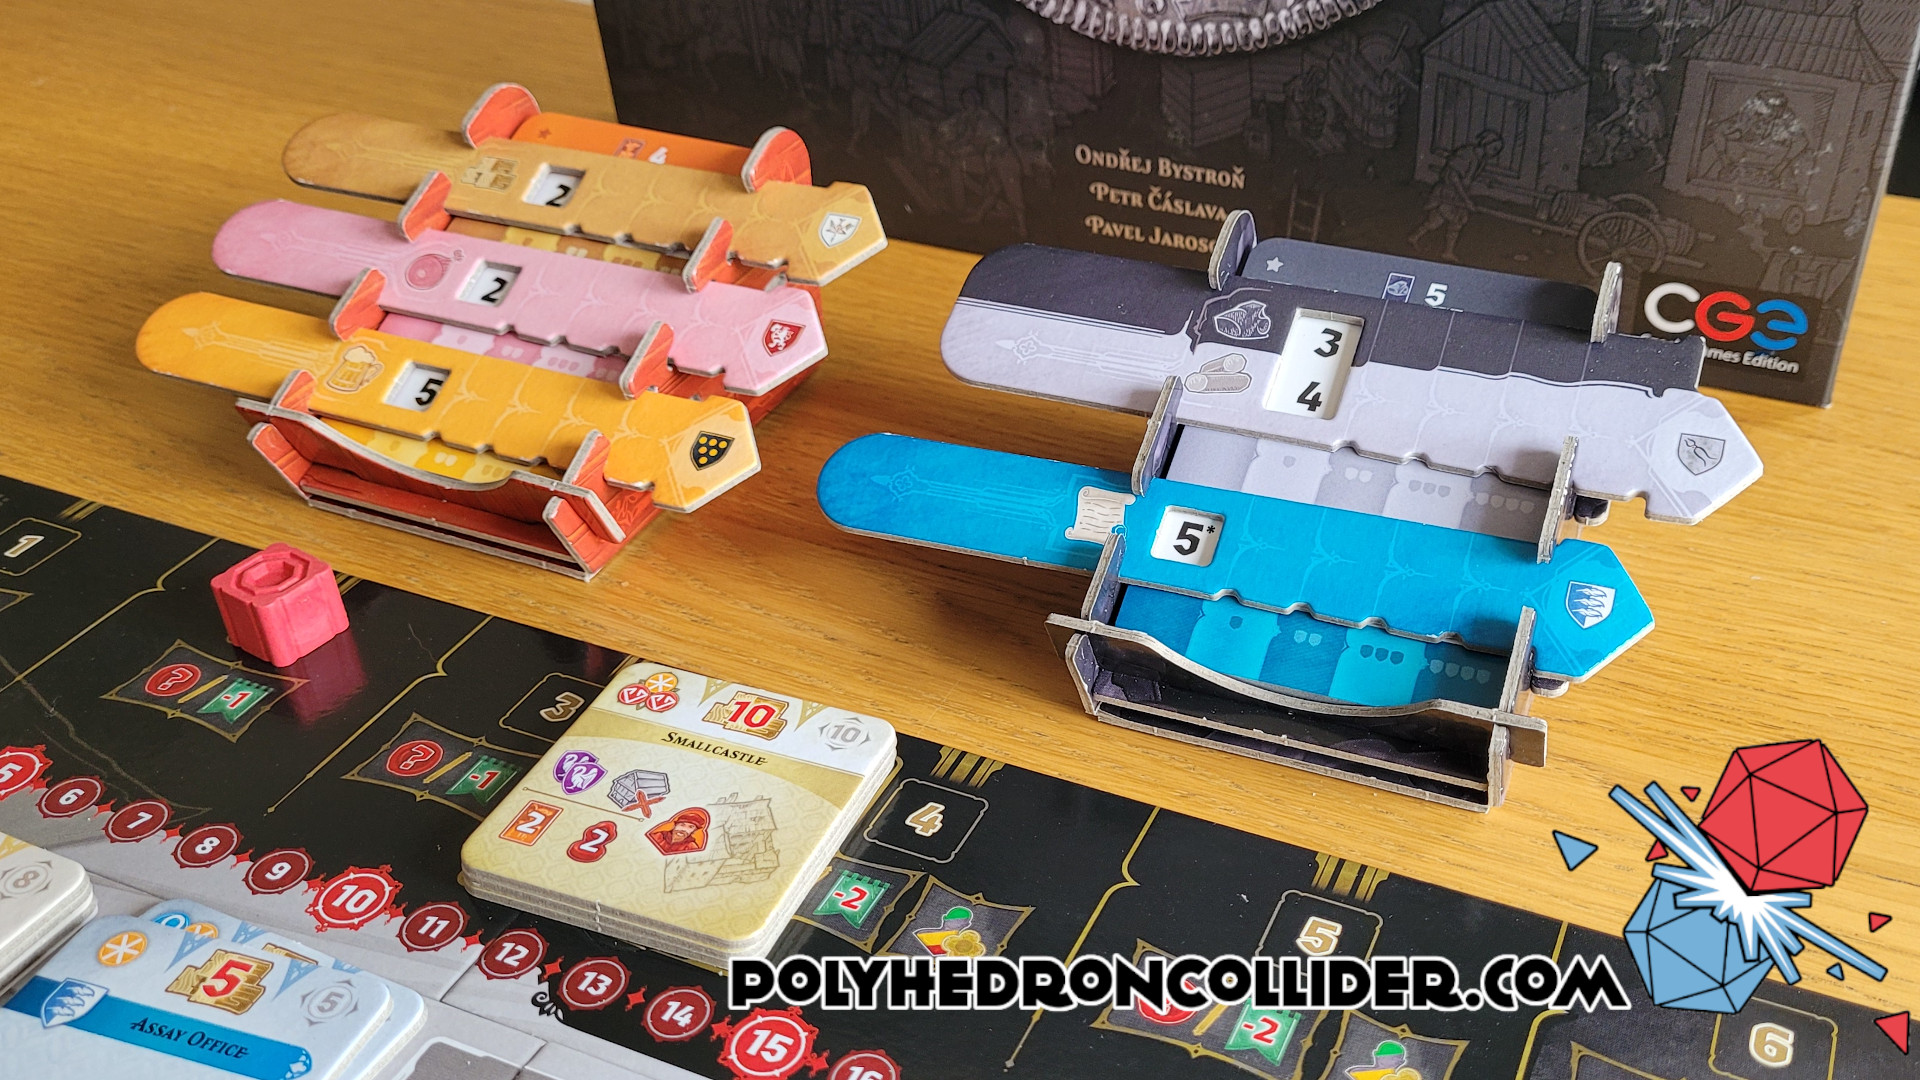 Ployhedron Colider Kutna Hora Boardgame Review - Card Holders